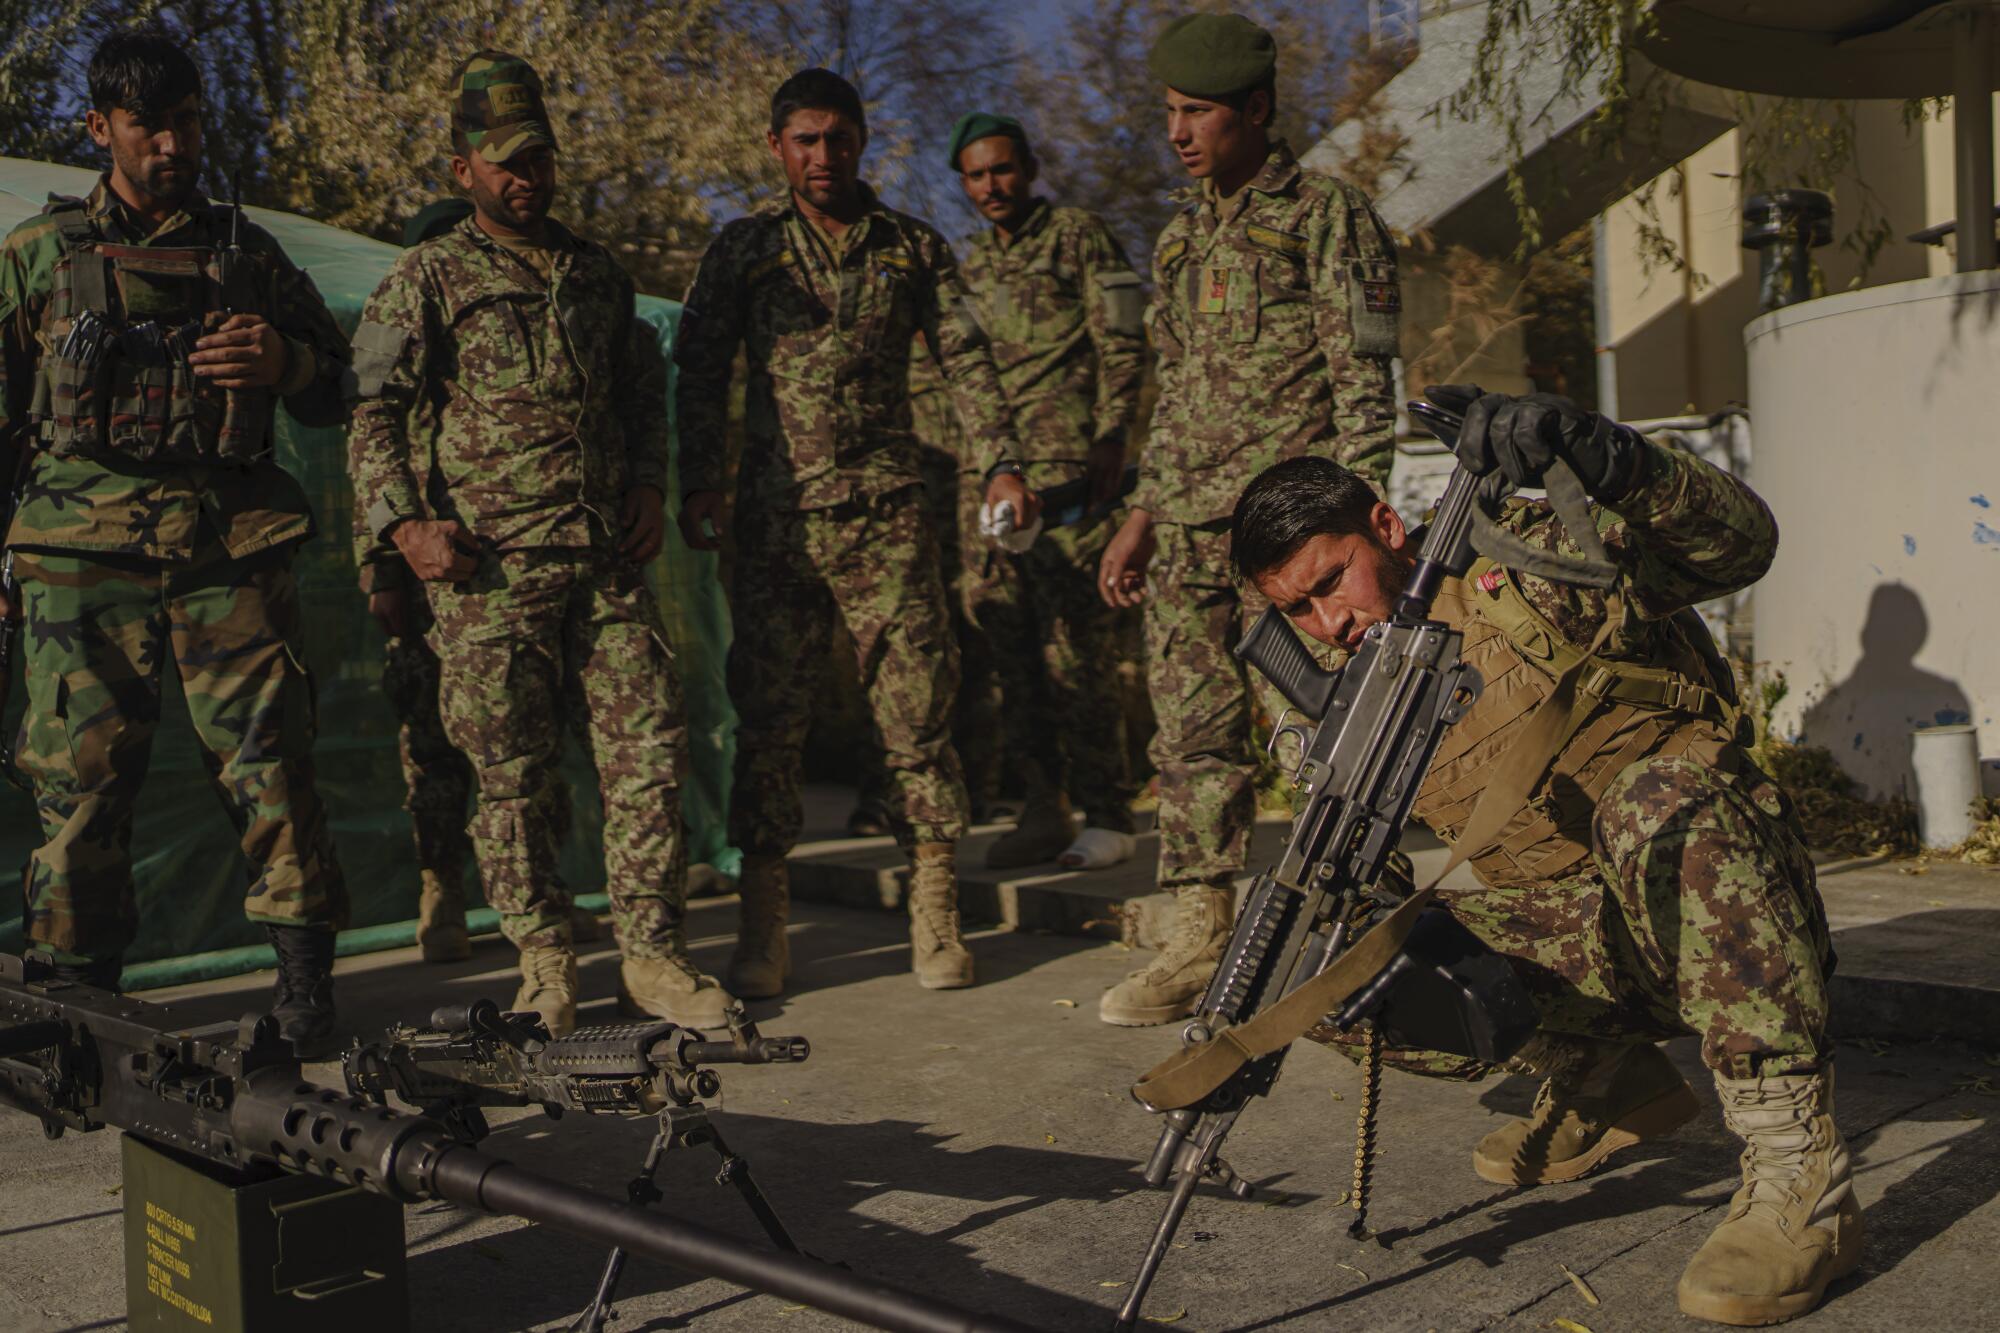 Soldiers inspect and clean their weapons.